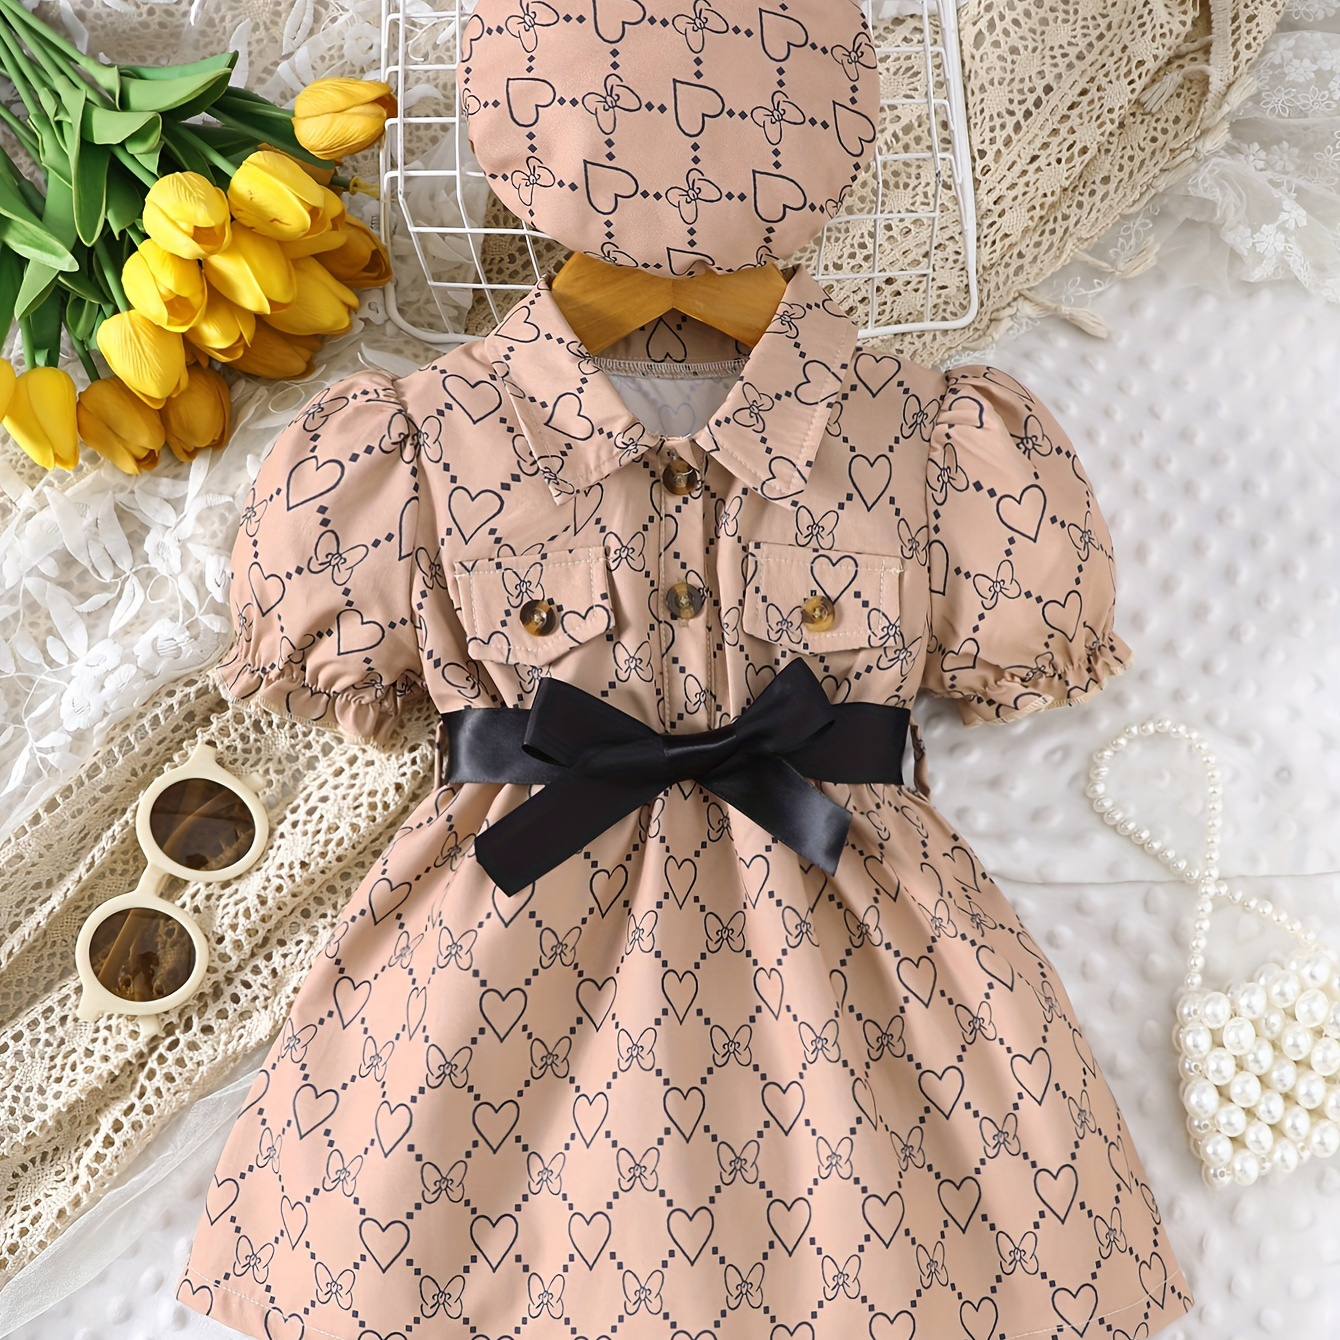 

Baby's Cartoon Bowknot & Heart Pattern Casual Dress & Hat, Button Front Puff Sleeve Dress, Infant & Toddler Girl's Clothing For Summer/spring, As Gift